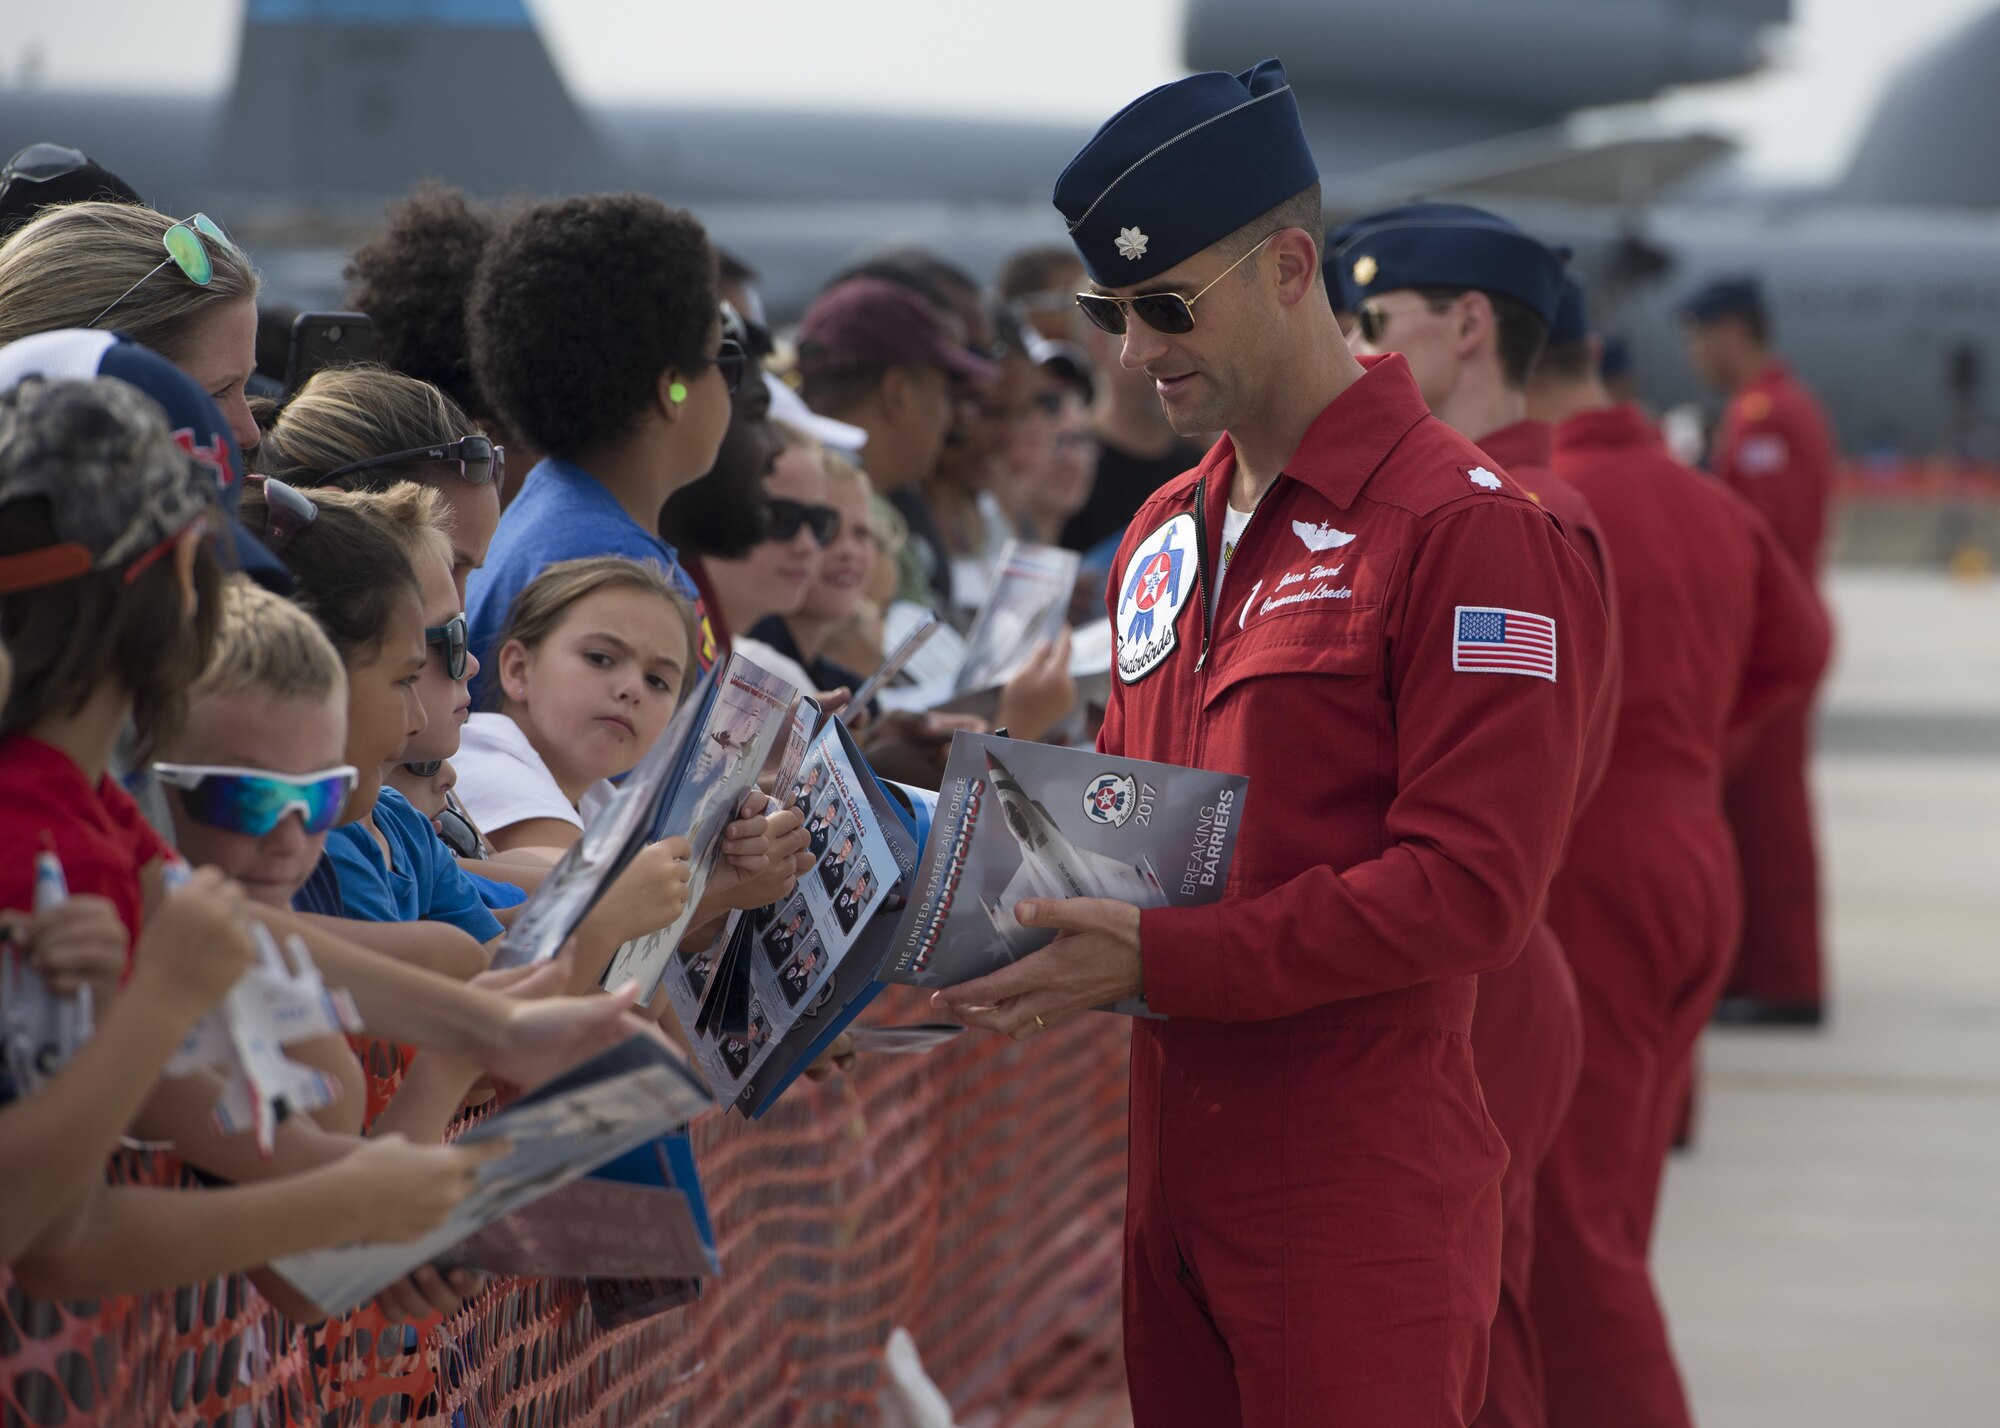 Lt. Col. Jason Heard, commander/leader of the U.S. Air Force Thunderbirds Air Demonstration Squadron and pilot of the No. 1 jet signs autographs after completing a performance during the Thunder Over Dover Open House Aug. 27, 2017, at Dover Air Force Base, Del. The Thunderbirds demonstrated the versatility of the F-16 Fighting Falcon by performing aerial acrobatics, precision formations and high-speed passes during their performance. (U.S. Air Force photo by Senior Airman Zachary Cacicia)